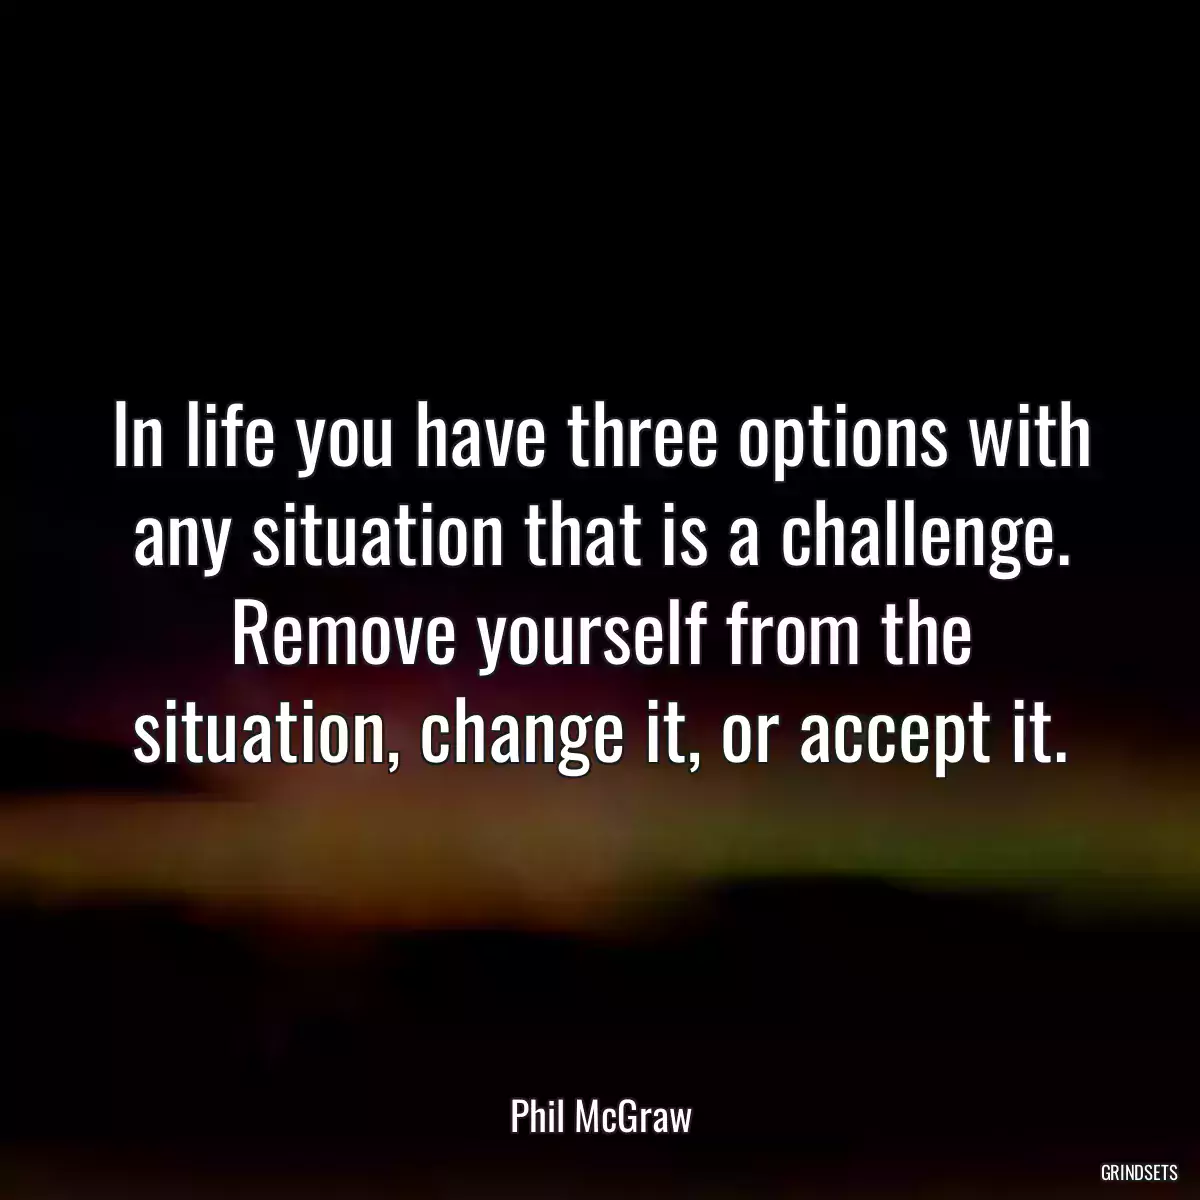 In life you have three options with any situation that is a challenge. Remove yourself from the situation, change it, or accept it.